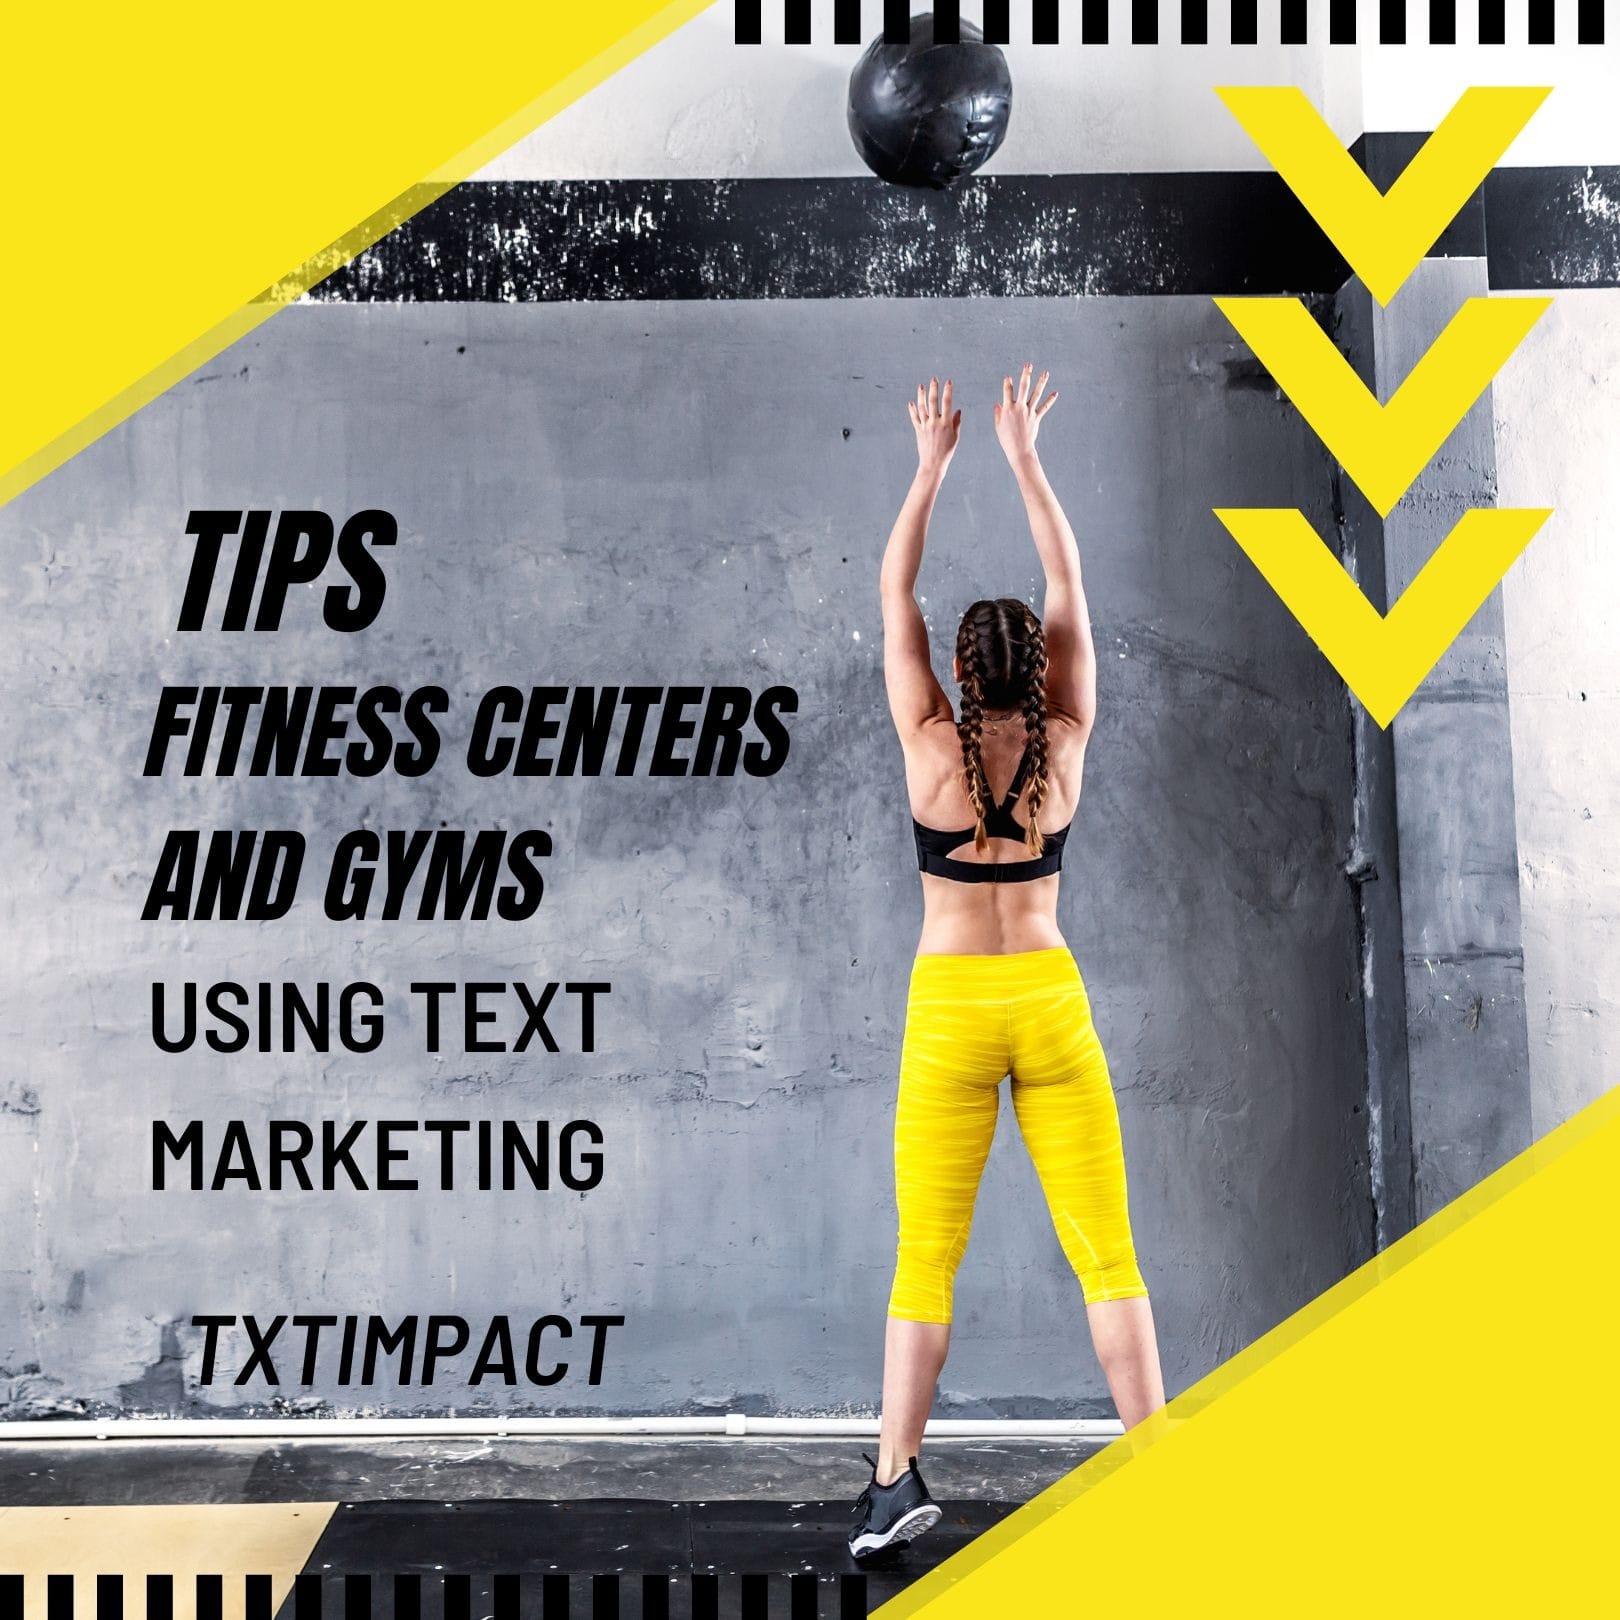 Tips for Fitness Centers and Gyms Using Text Marketing.jpg